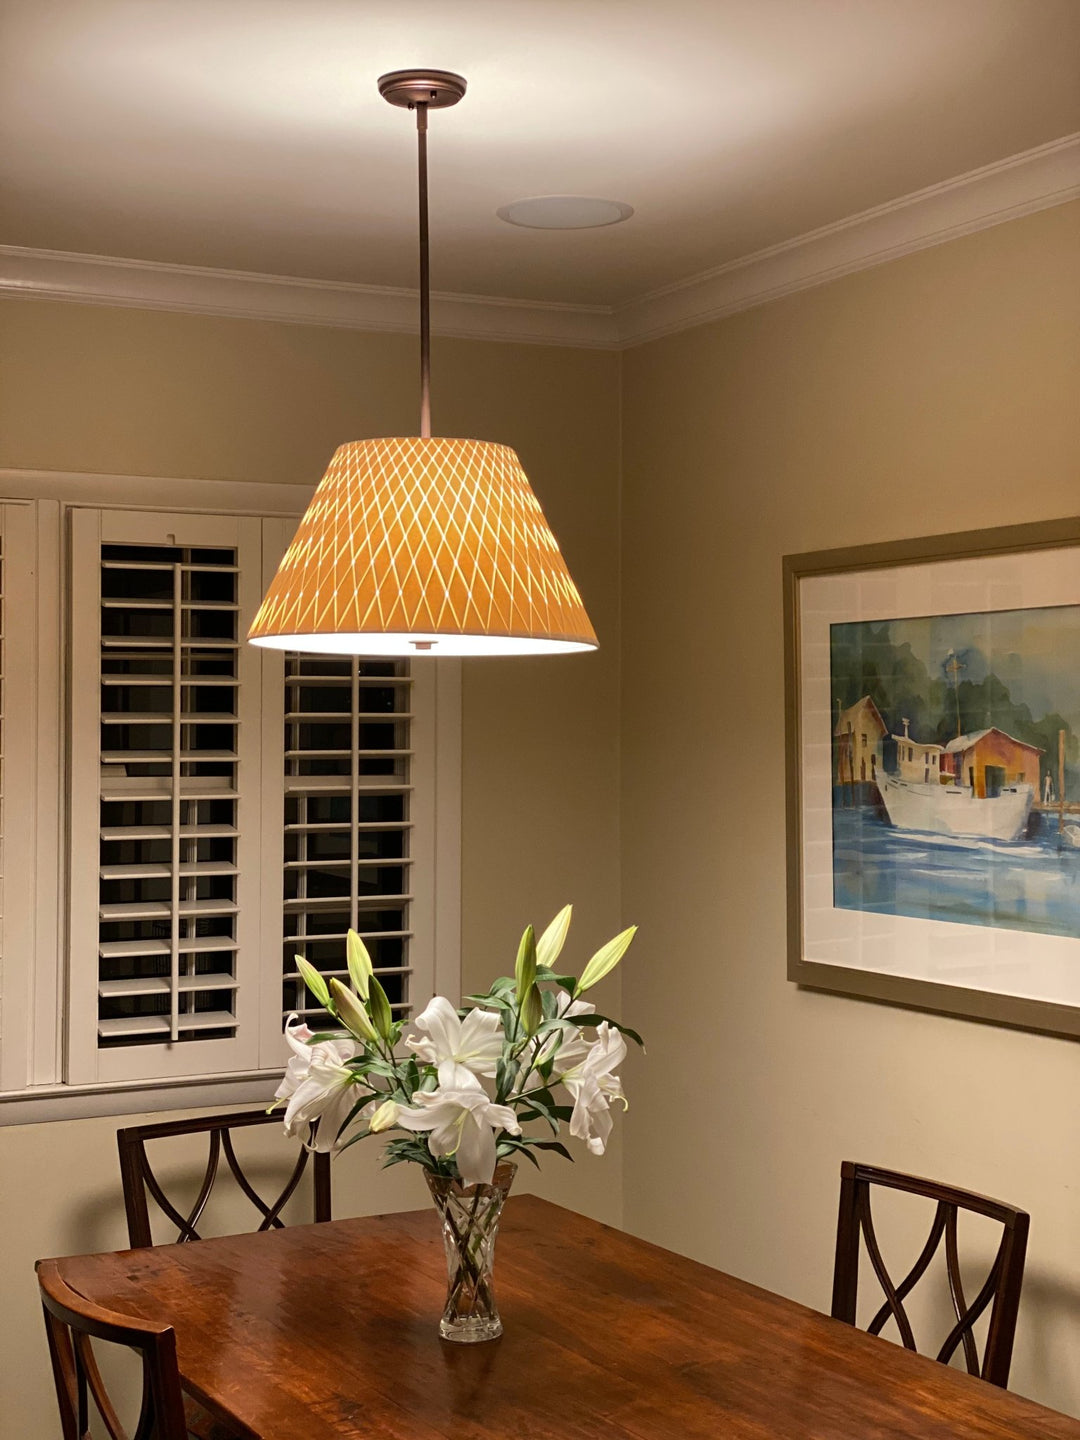 20" Woven Paper Pendant Shade with Two bulb Socket and diffuser - Lux Lamp Shades